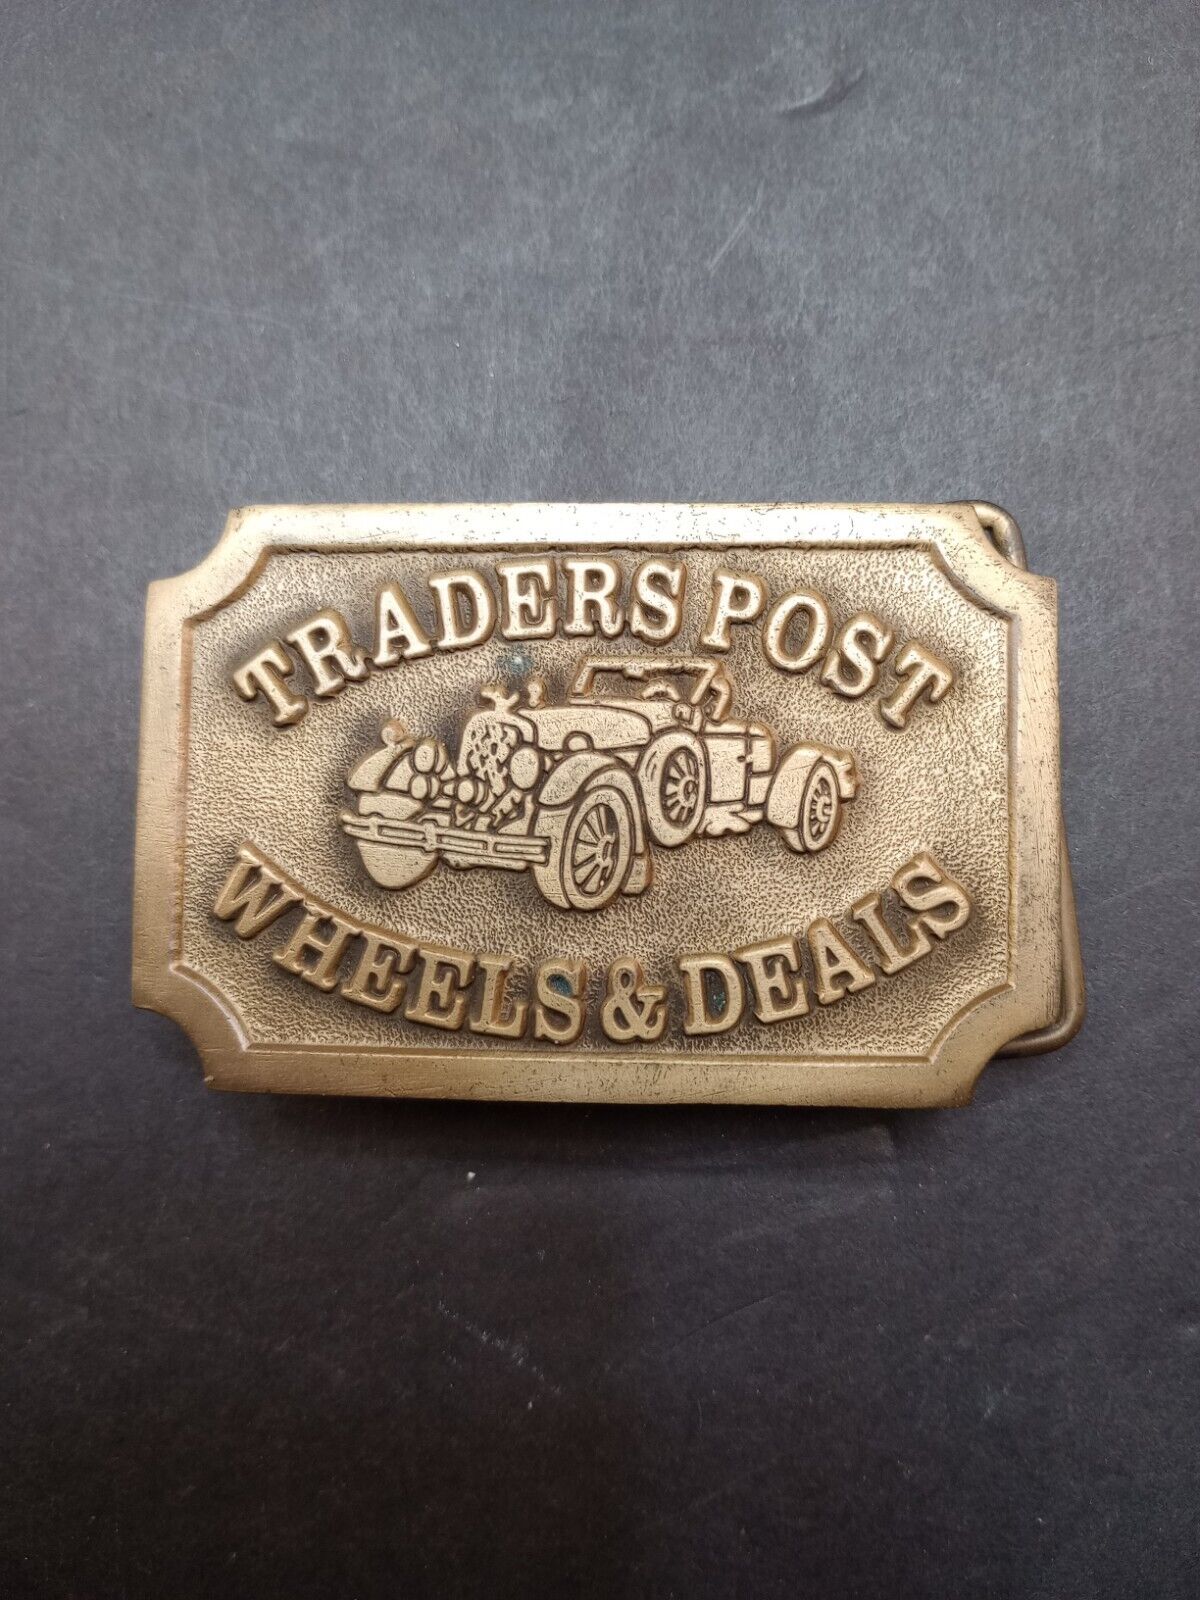 VERY RARE 1981, 10th Anniversary 1 Of 100 Trader's Post,Wheels & Deals  BUCKLE 